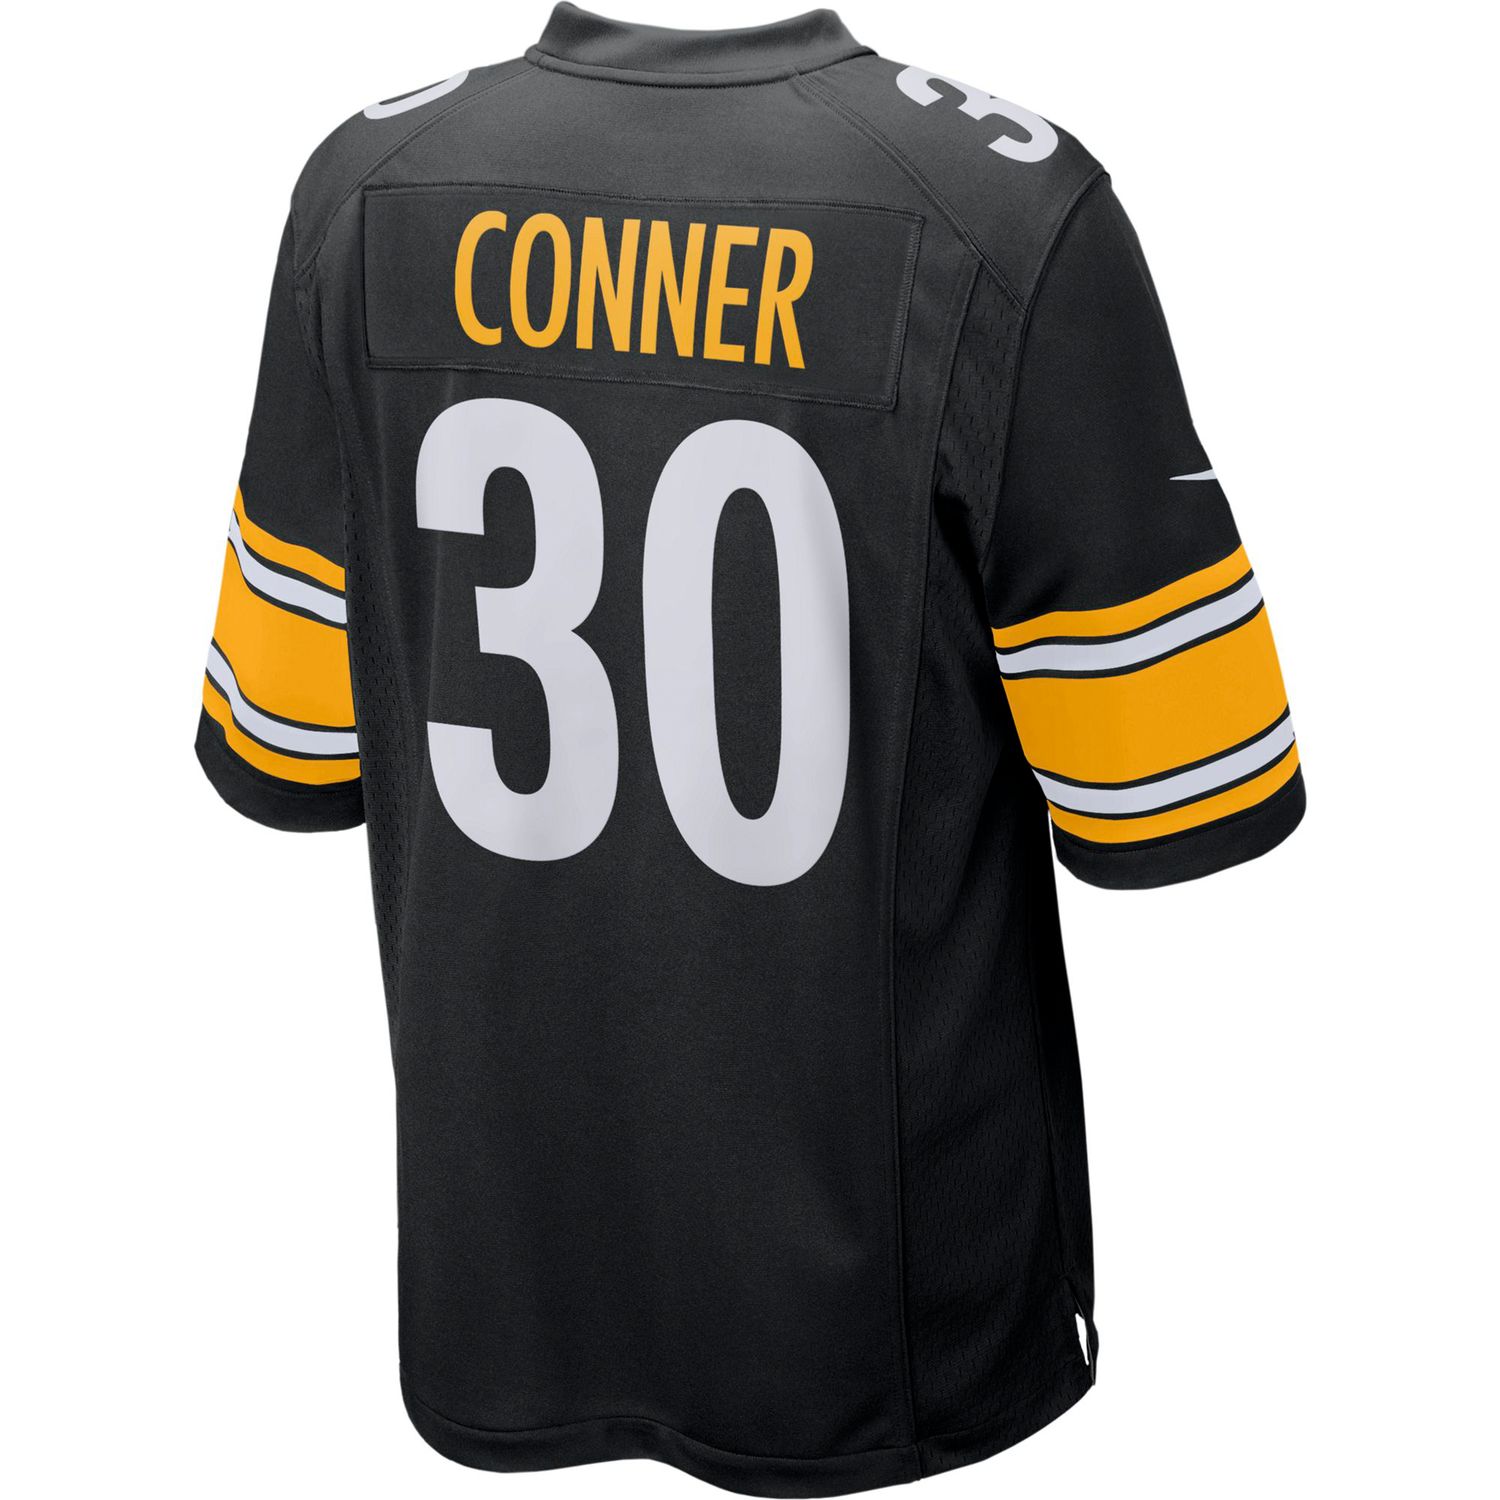 steelers conner jersey